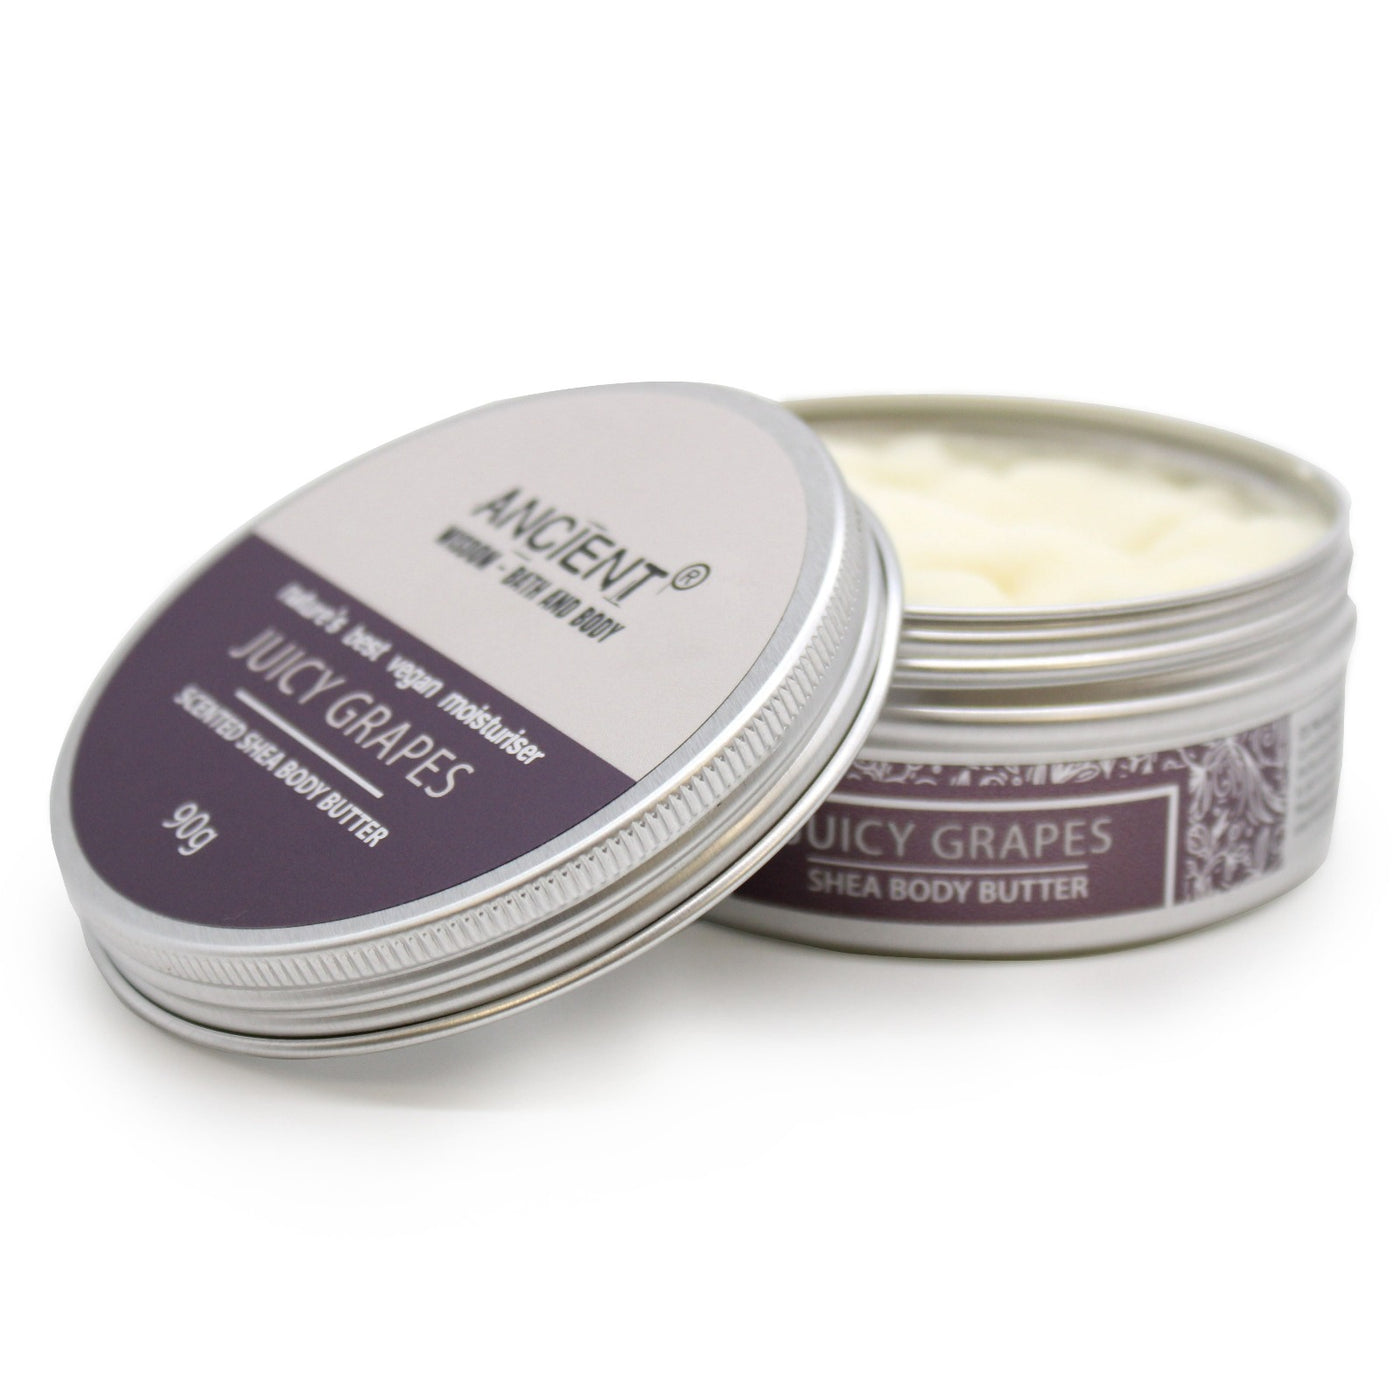 Paraben Free Scented Shea Body Butter - Juicy Grape 90g.